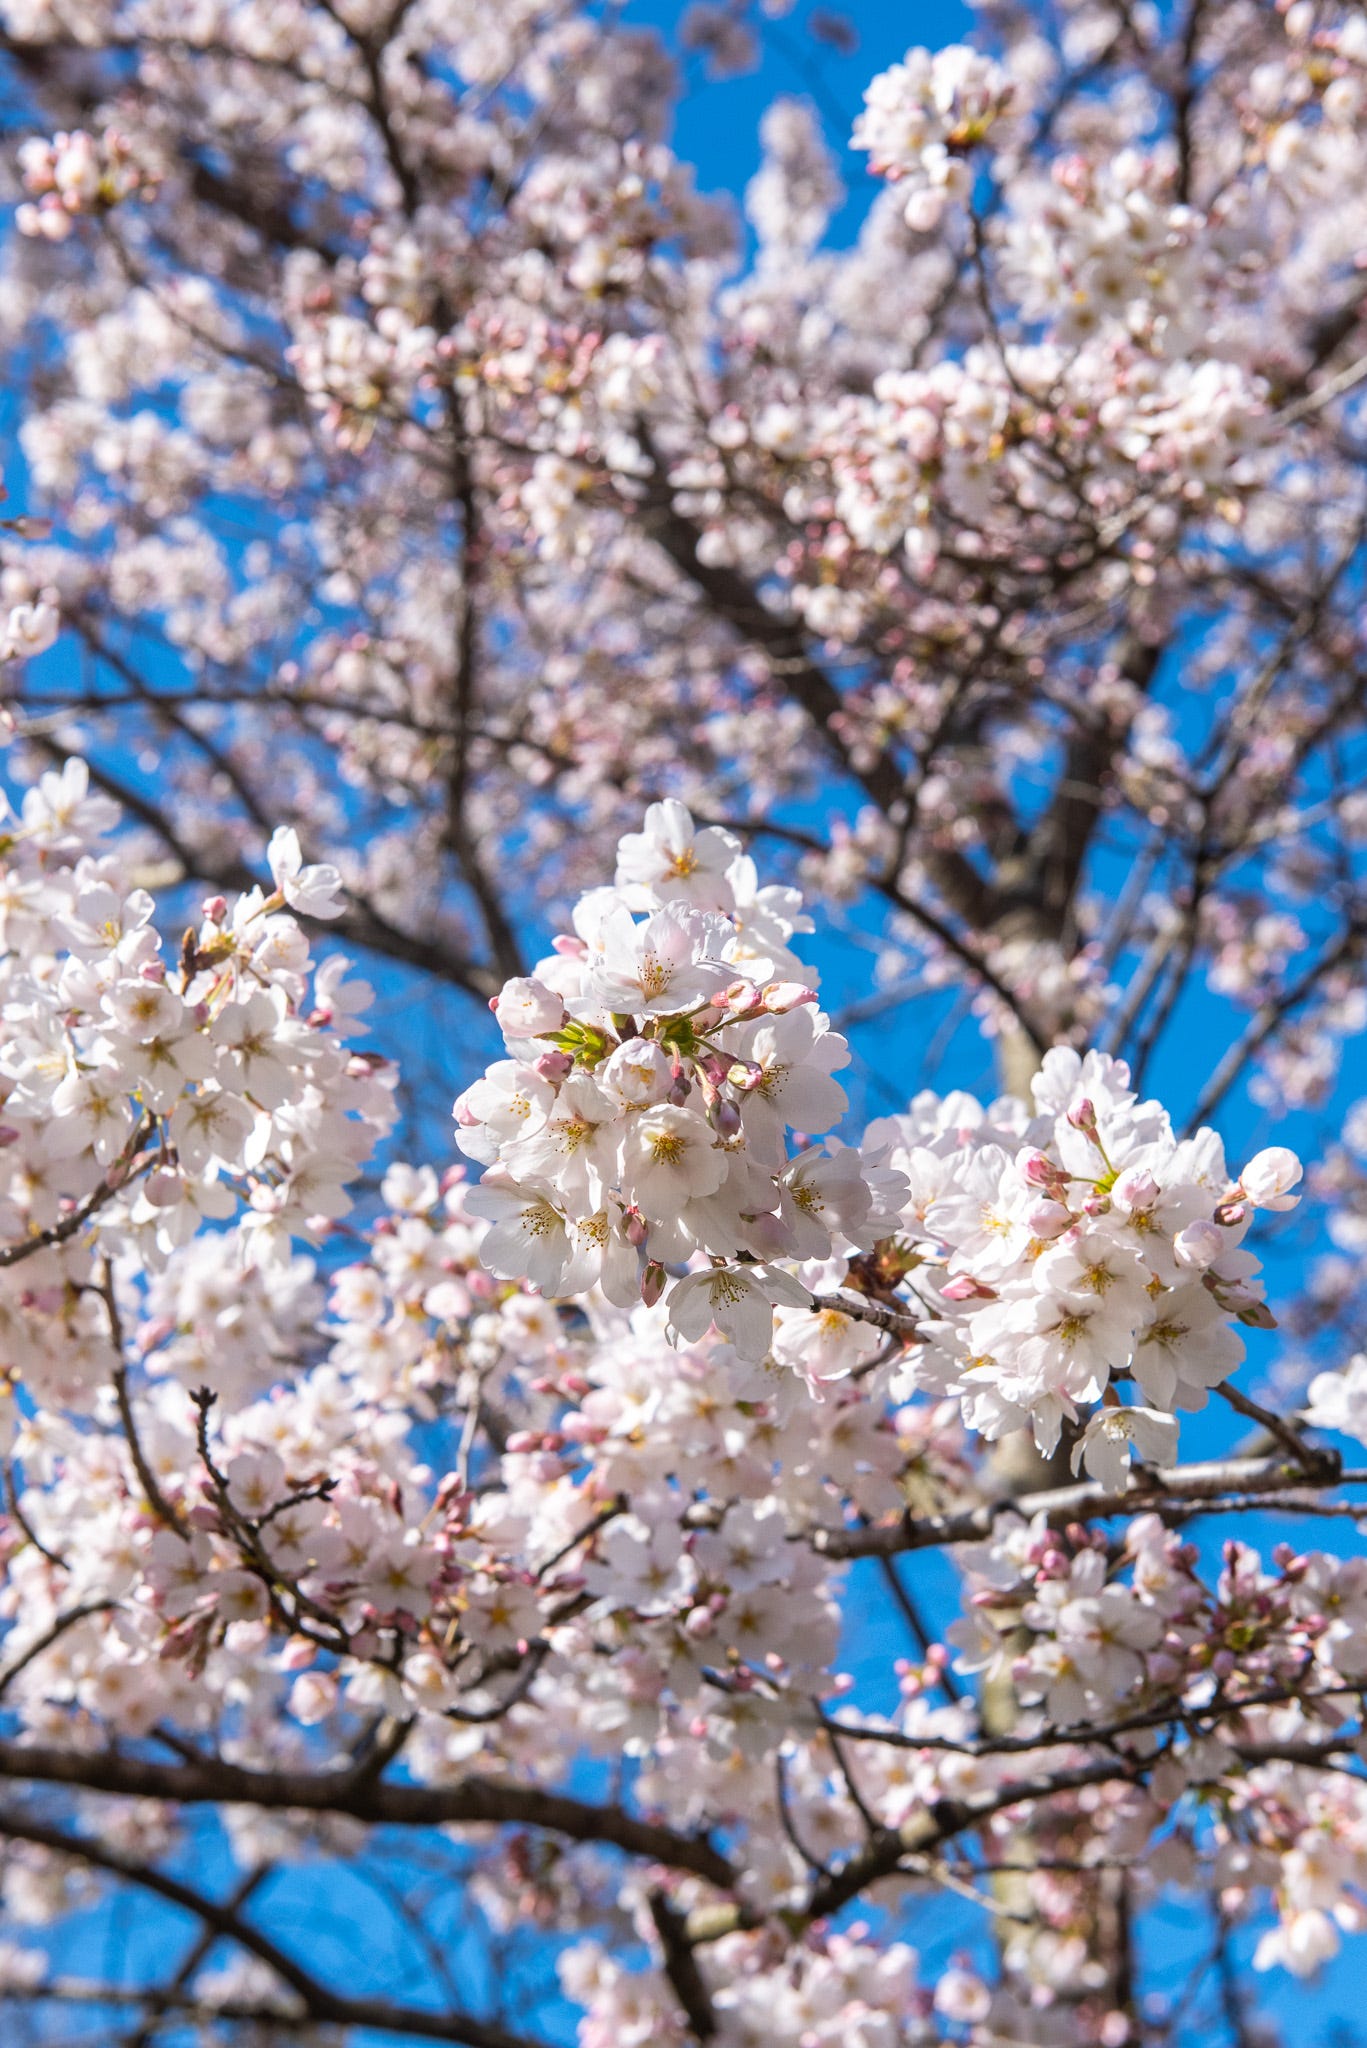 ID: Close up of cherry blossoms on the tree, looking upward towards a blue cloudless sky